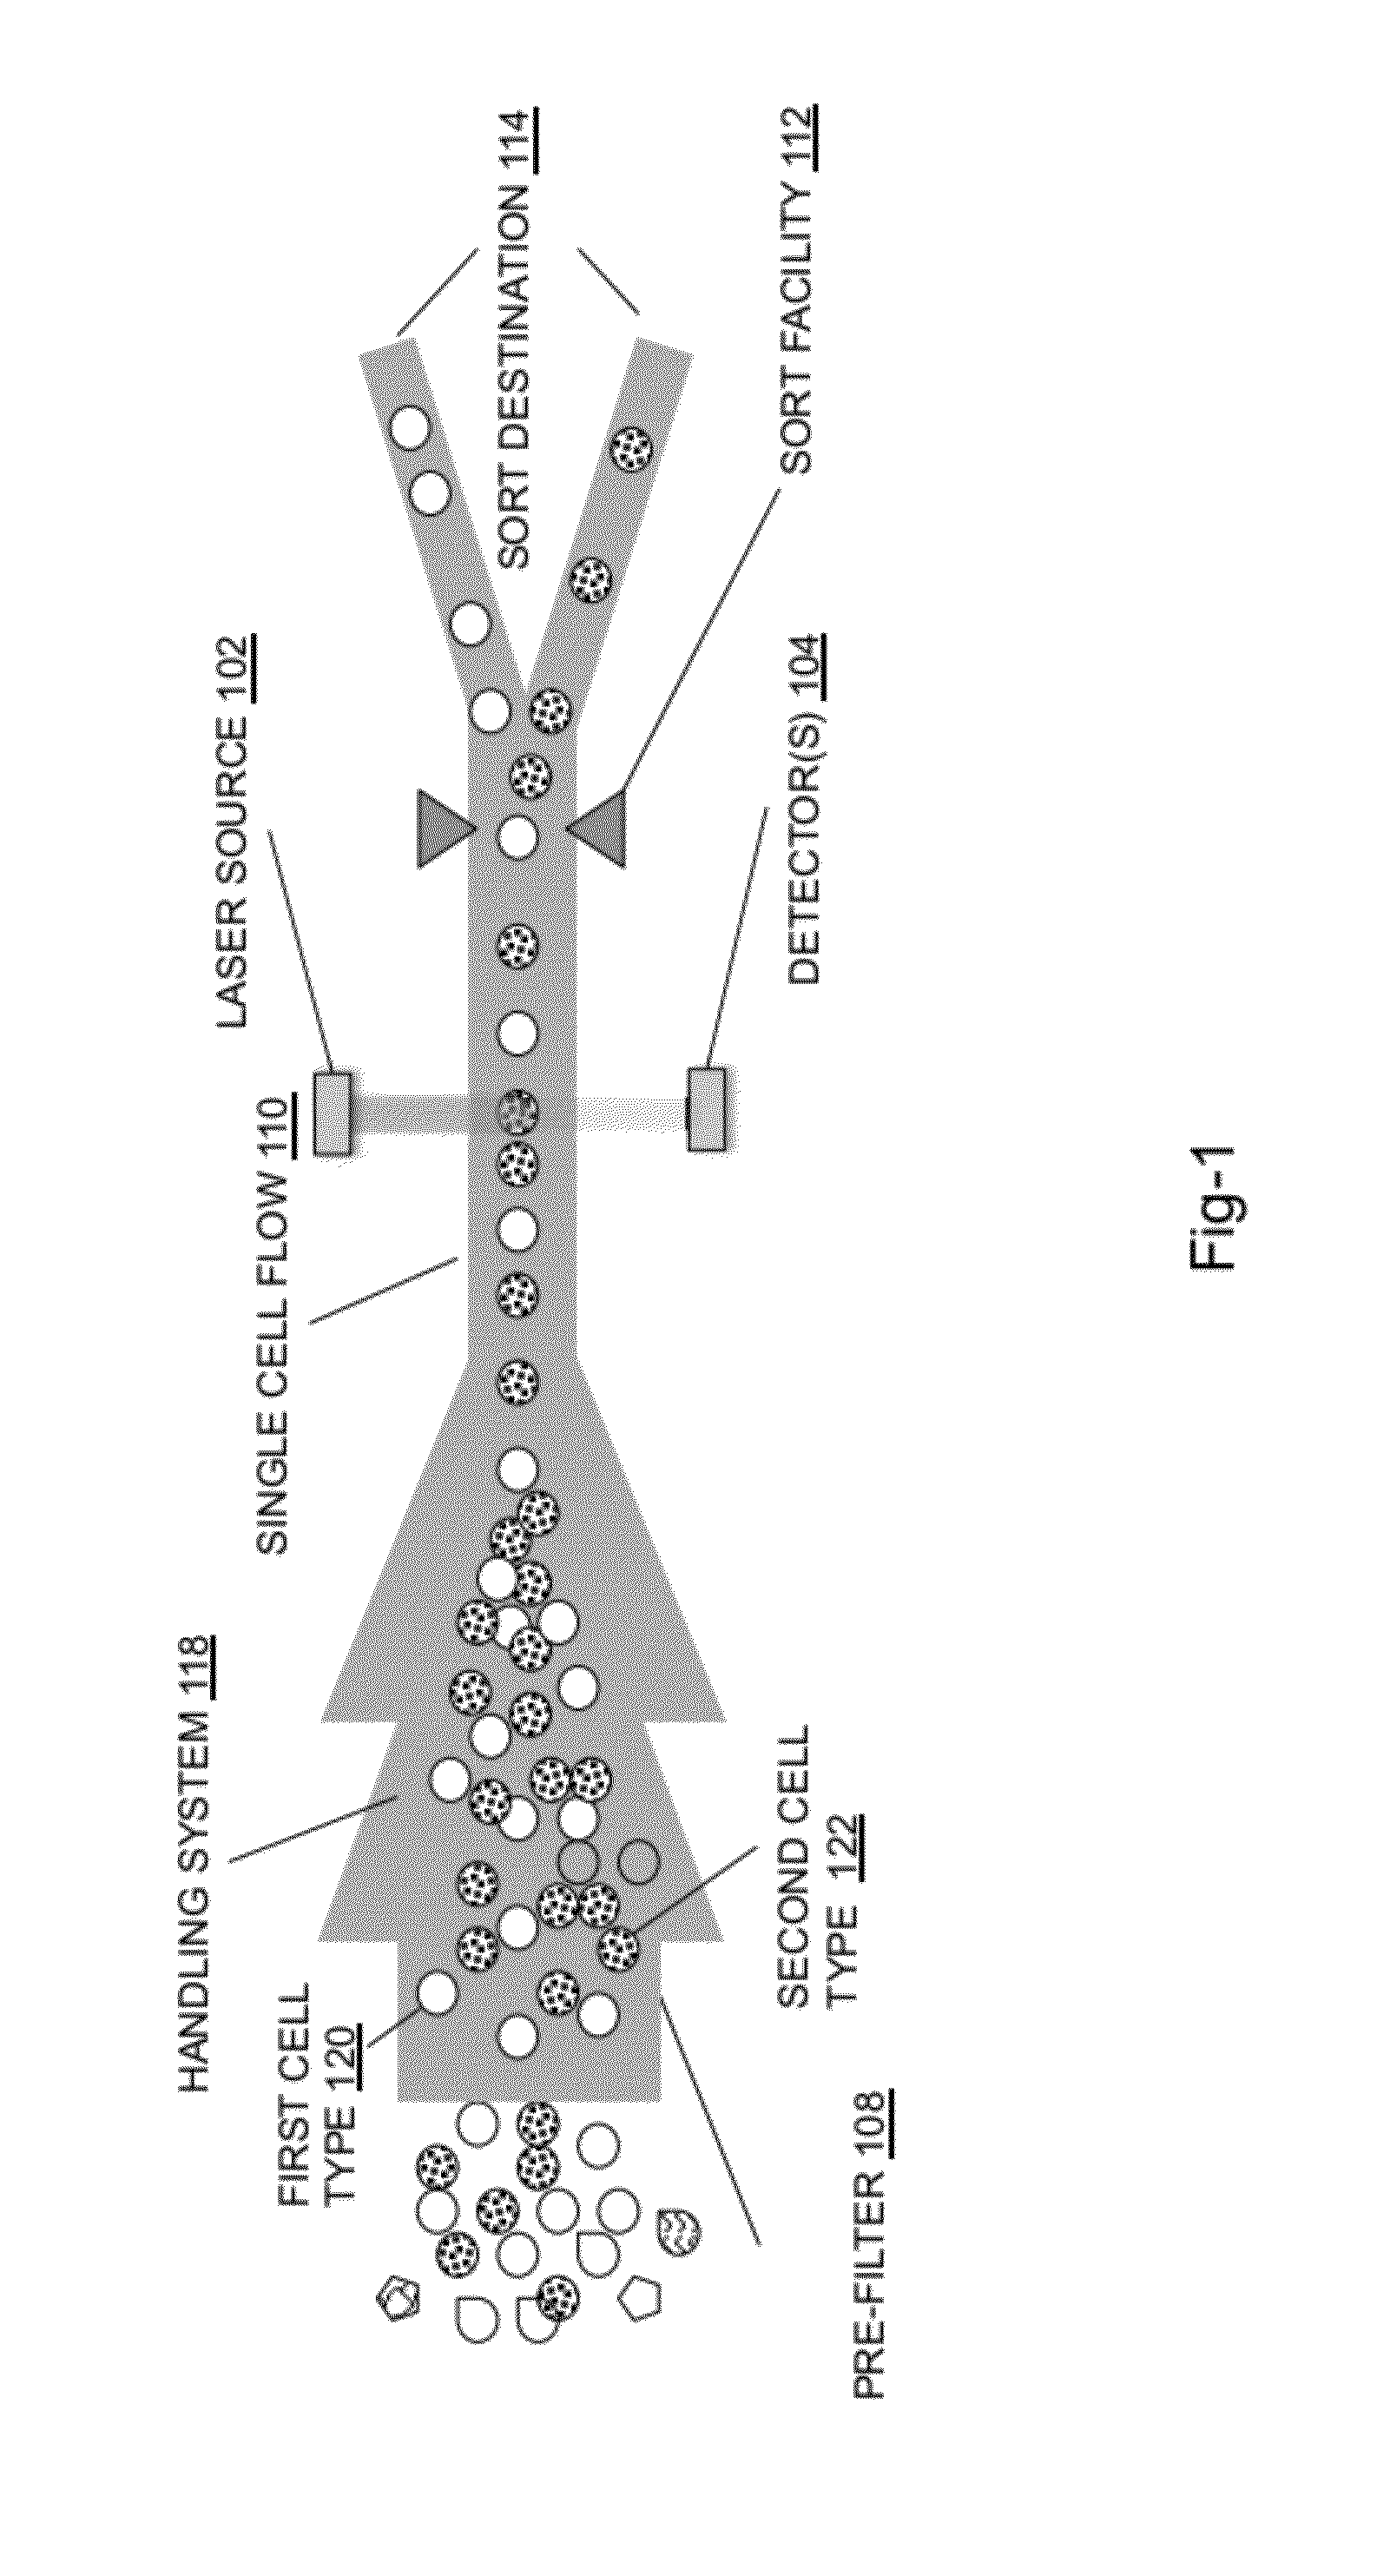 System for identifying and sorting living cells